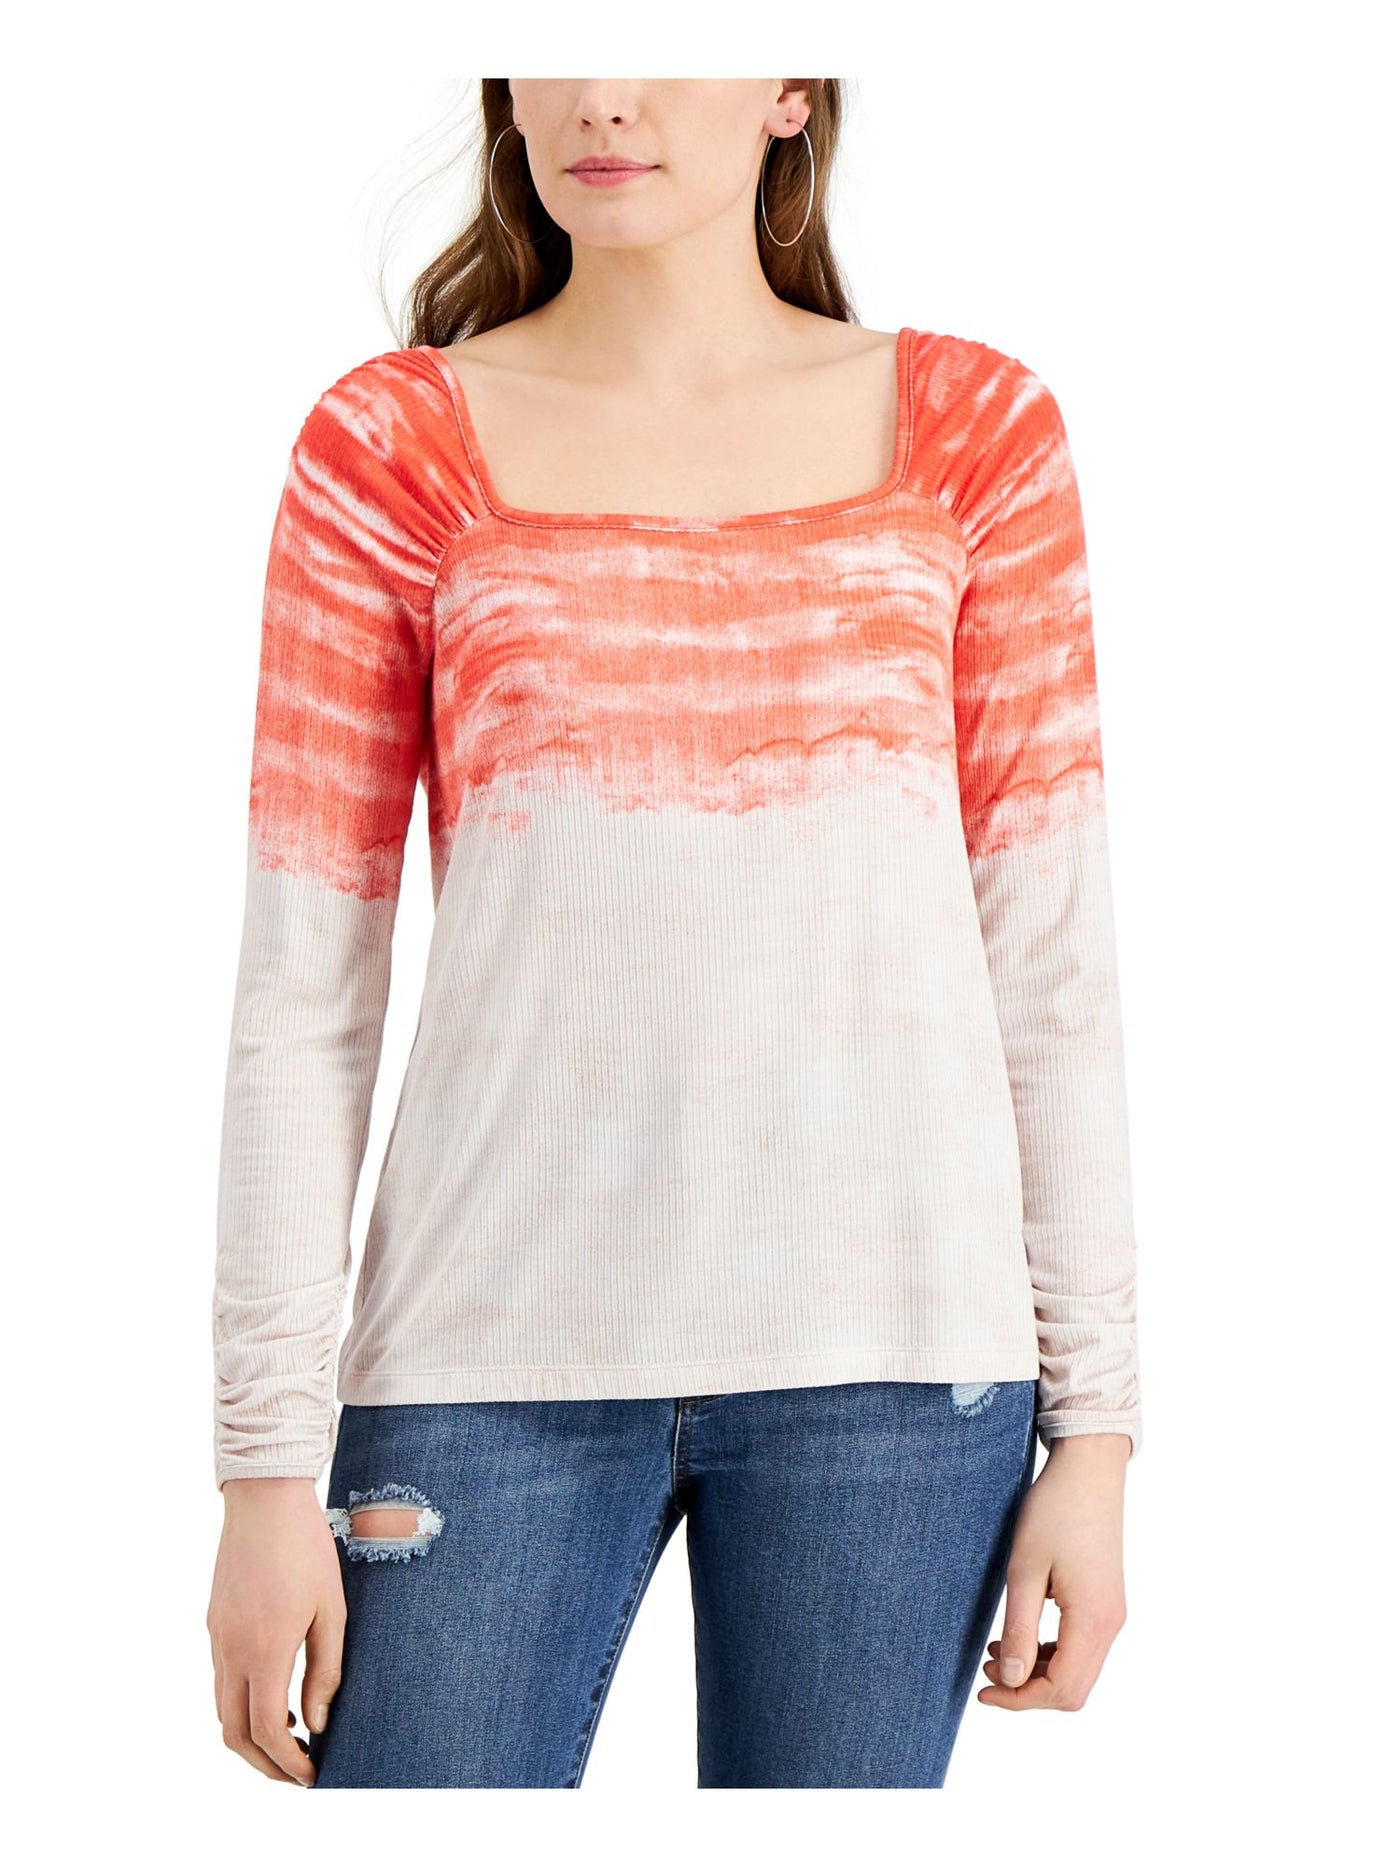 FEVER Womens Orange Ribbed Tie Dye Long Sleeve Square Neck Top M